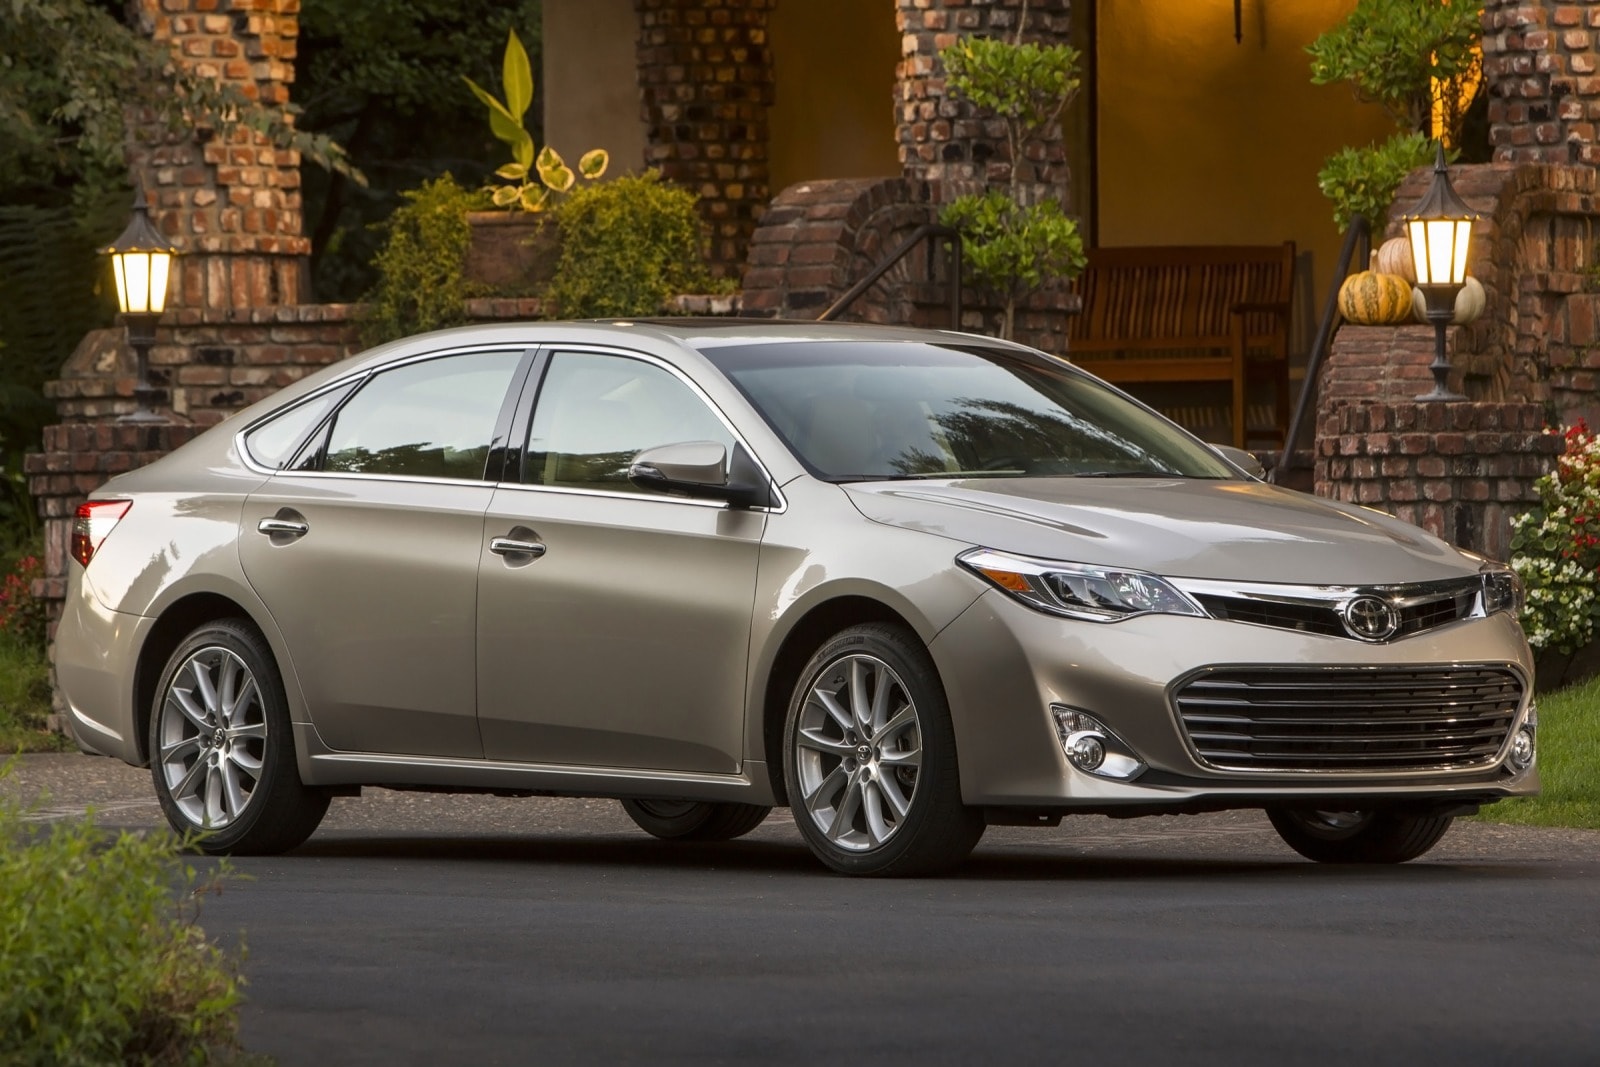 2013 Toyota Avalon Review & Ratings | Edmunds